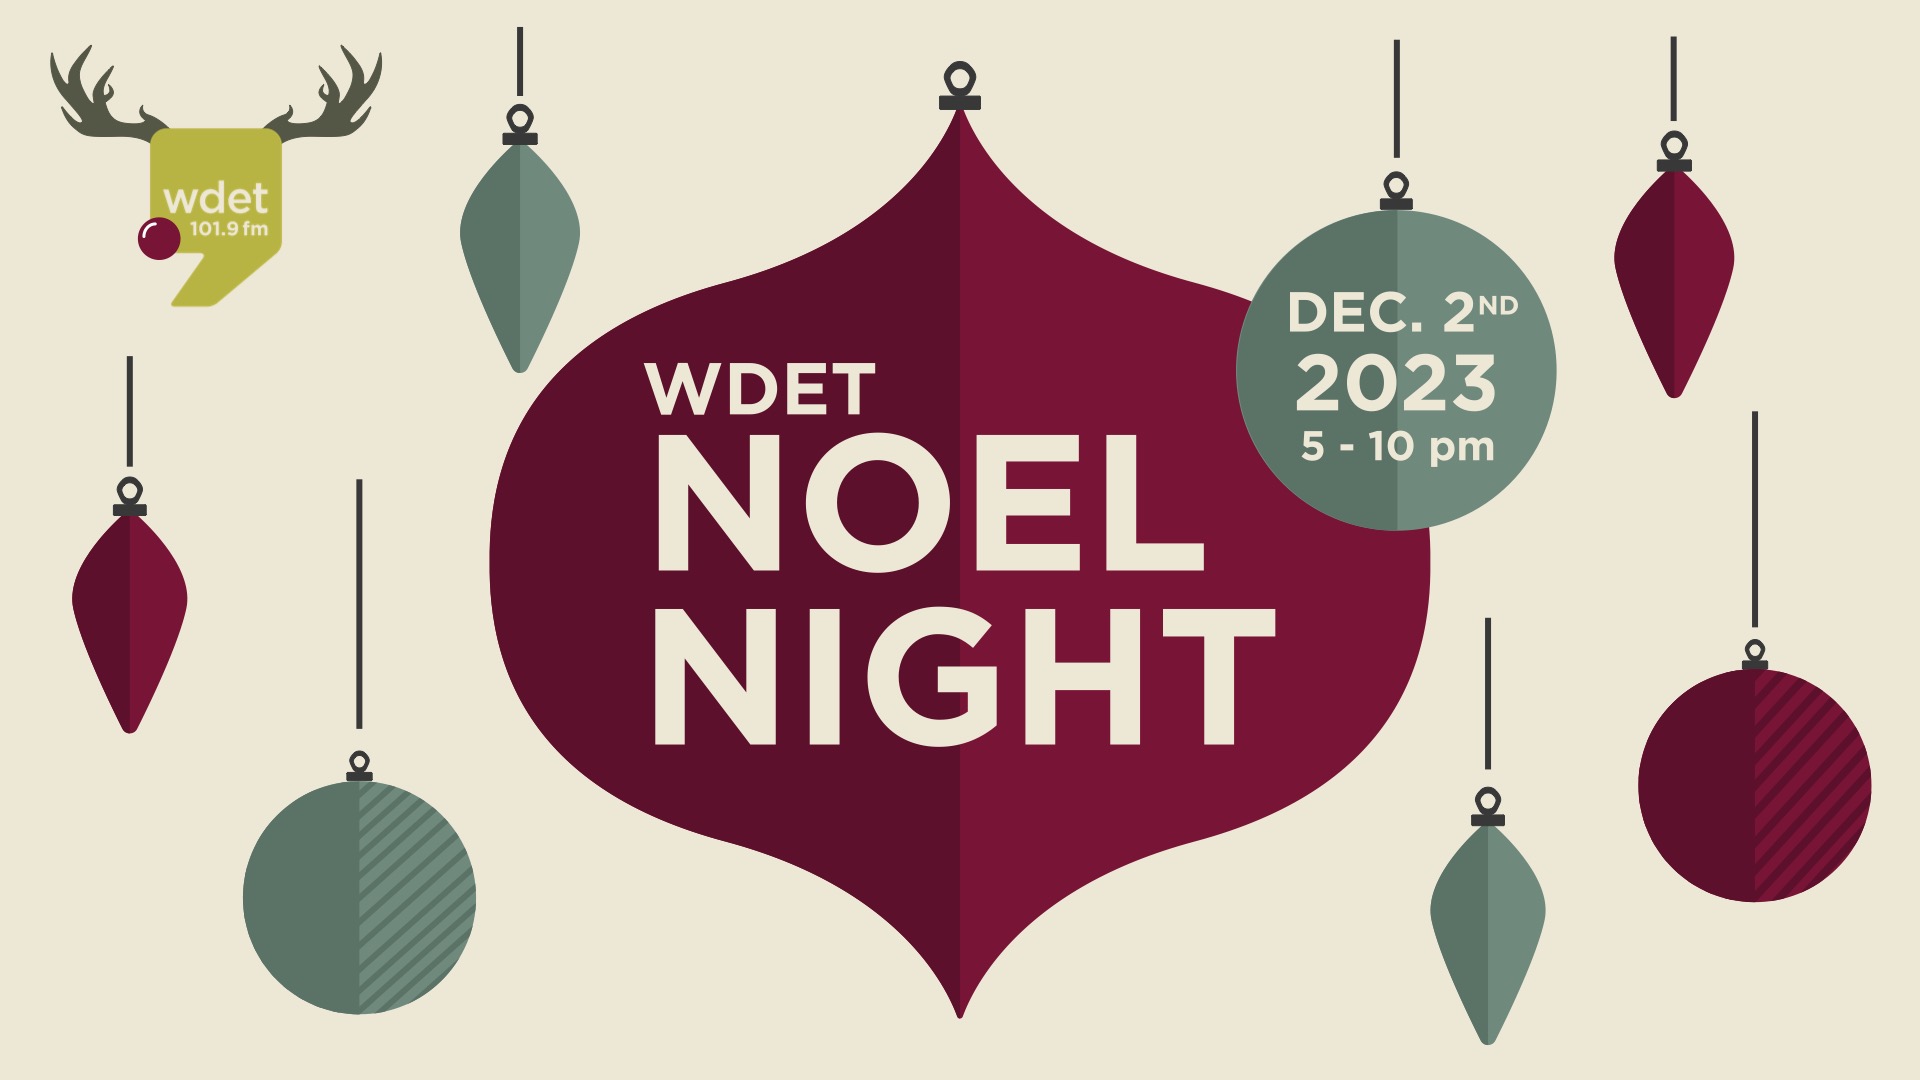 WDET Noel Night on December 2nd, 2023 from 5 to 10 p.m.